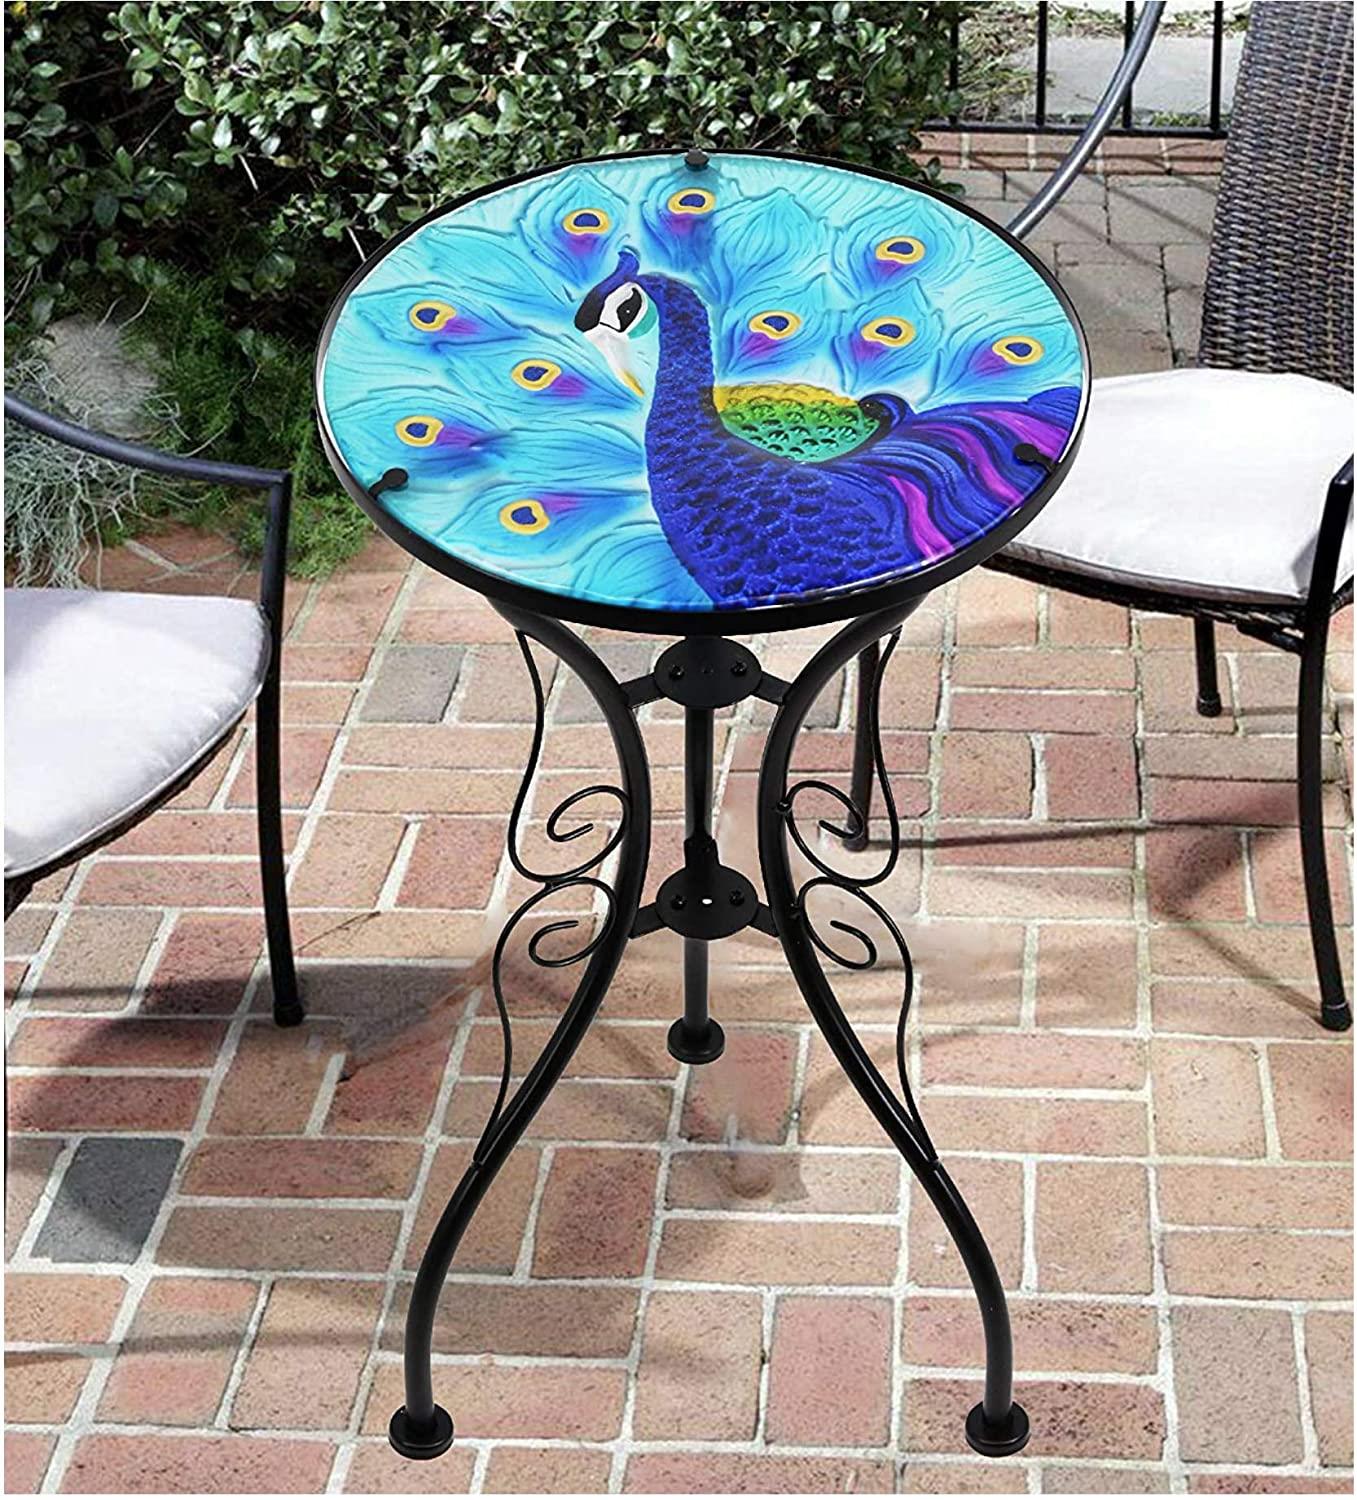 Geezy table Round Side Mosaic Garden Table With Blue Peacock Design